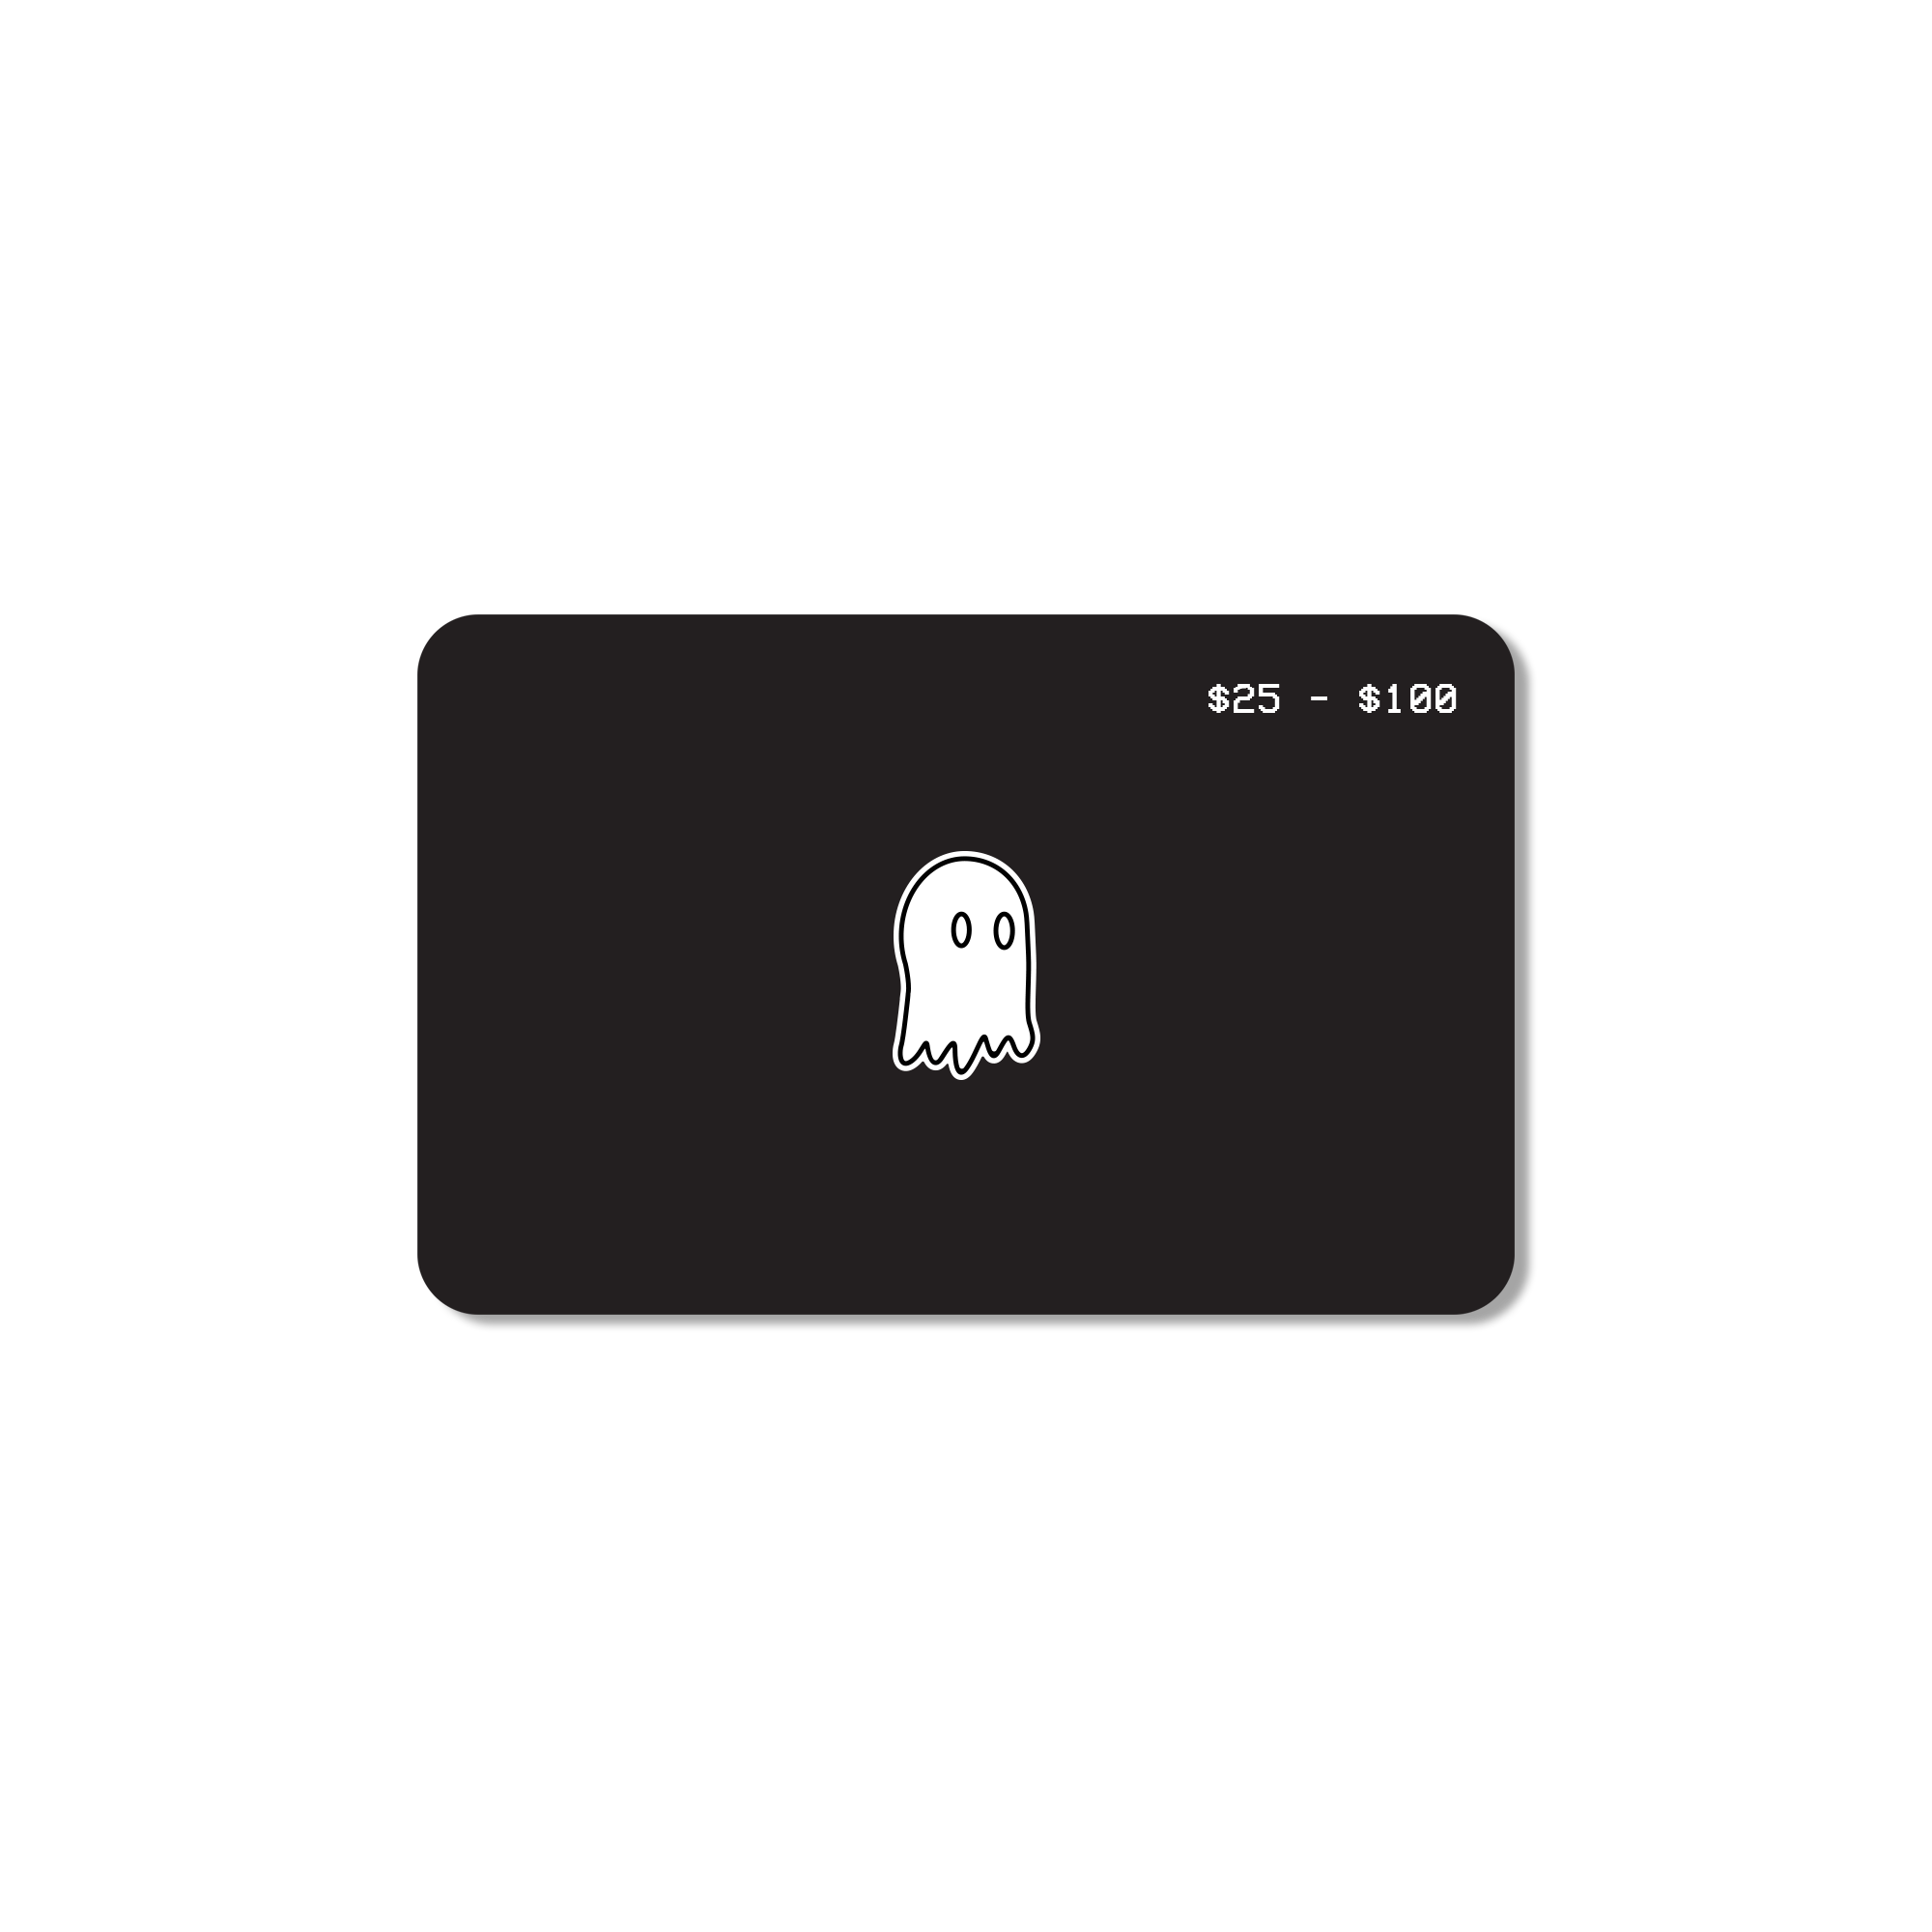 The Ghosty Card